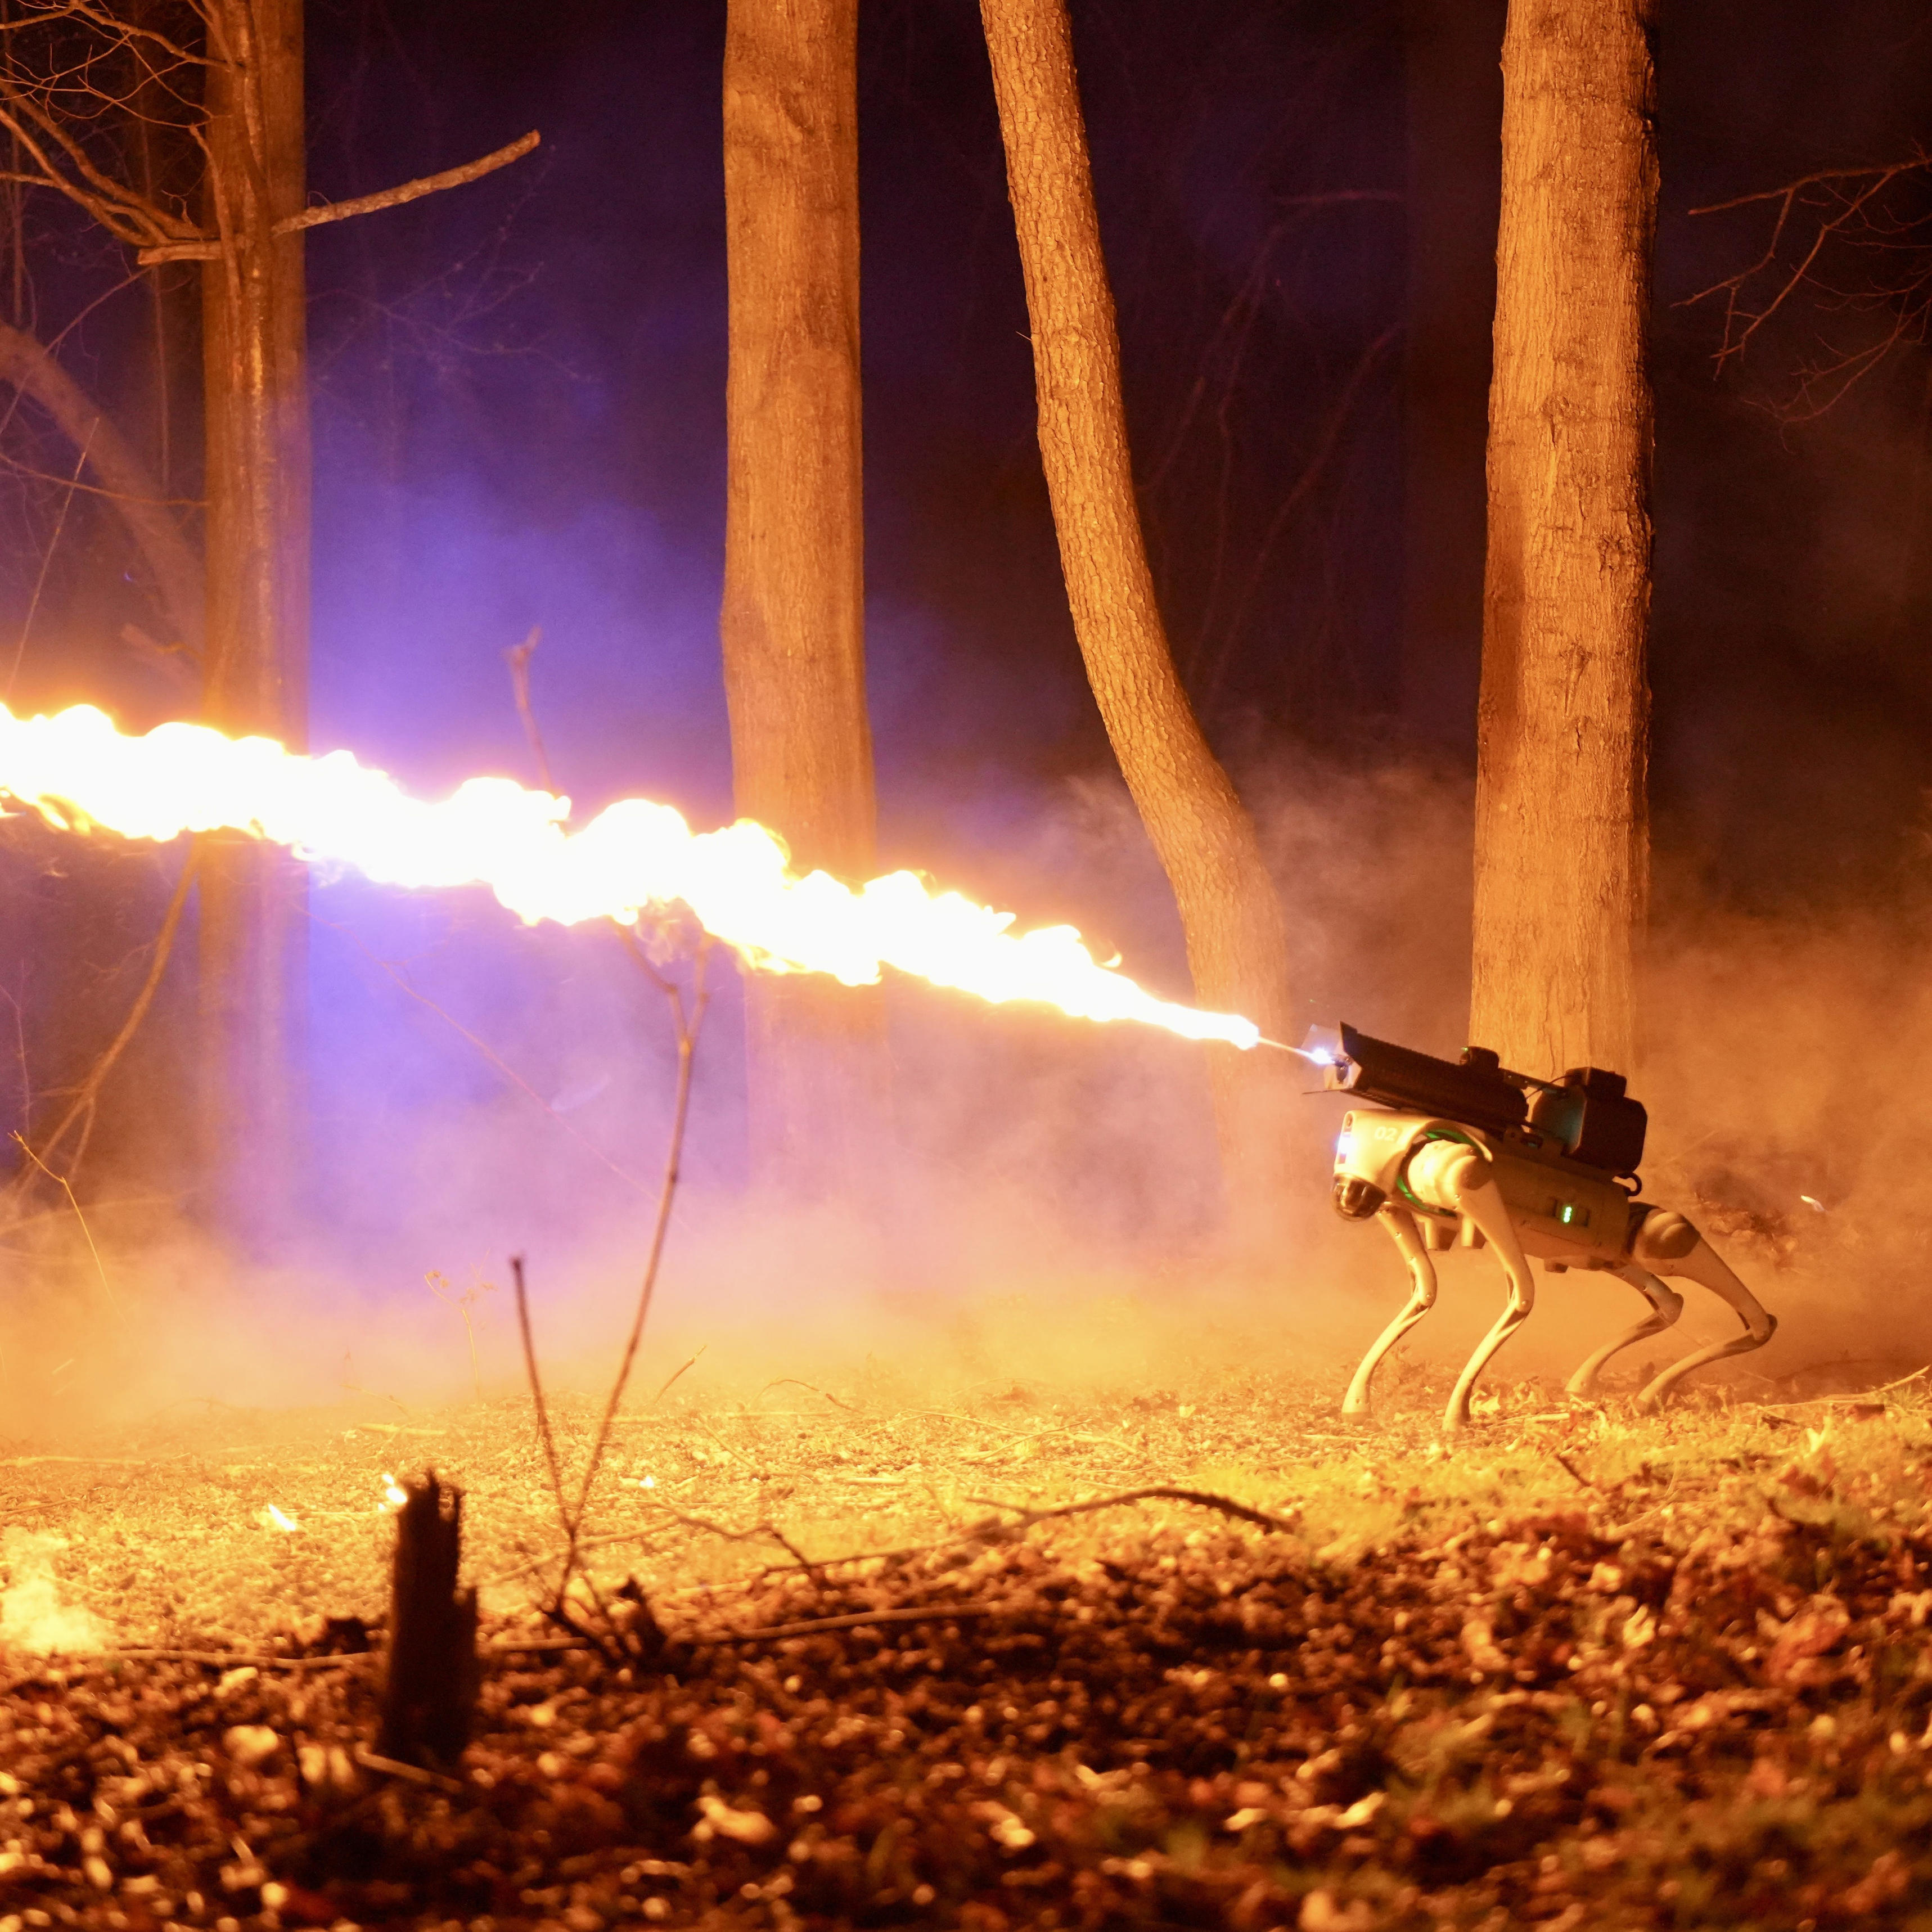 meet thermonator, a flame-throwing robot dog with 30-foot range being sold by ohio company